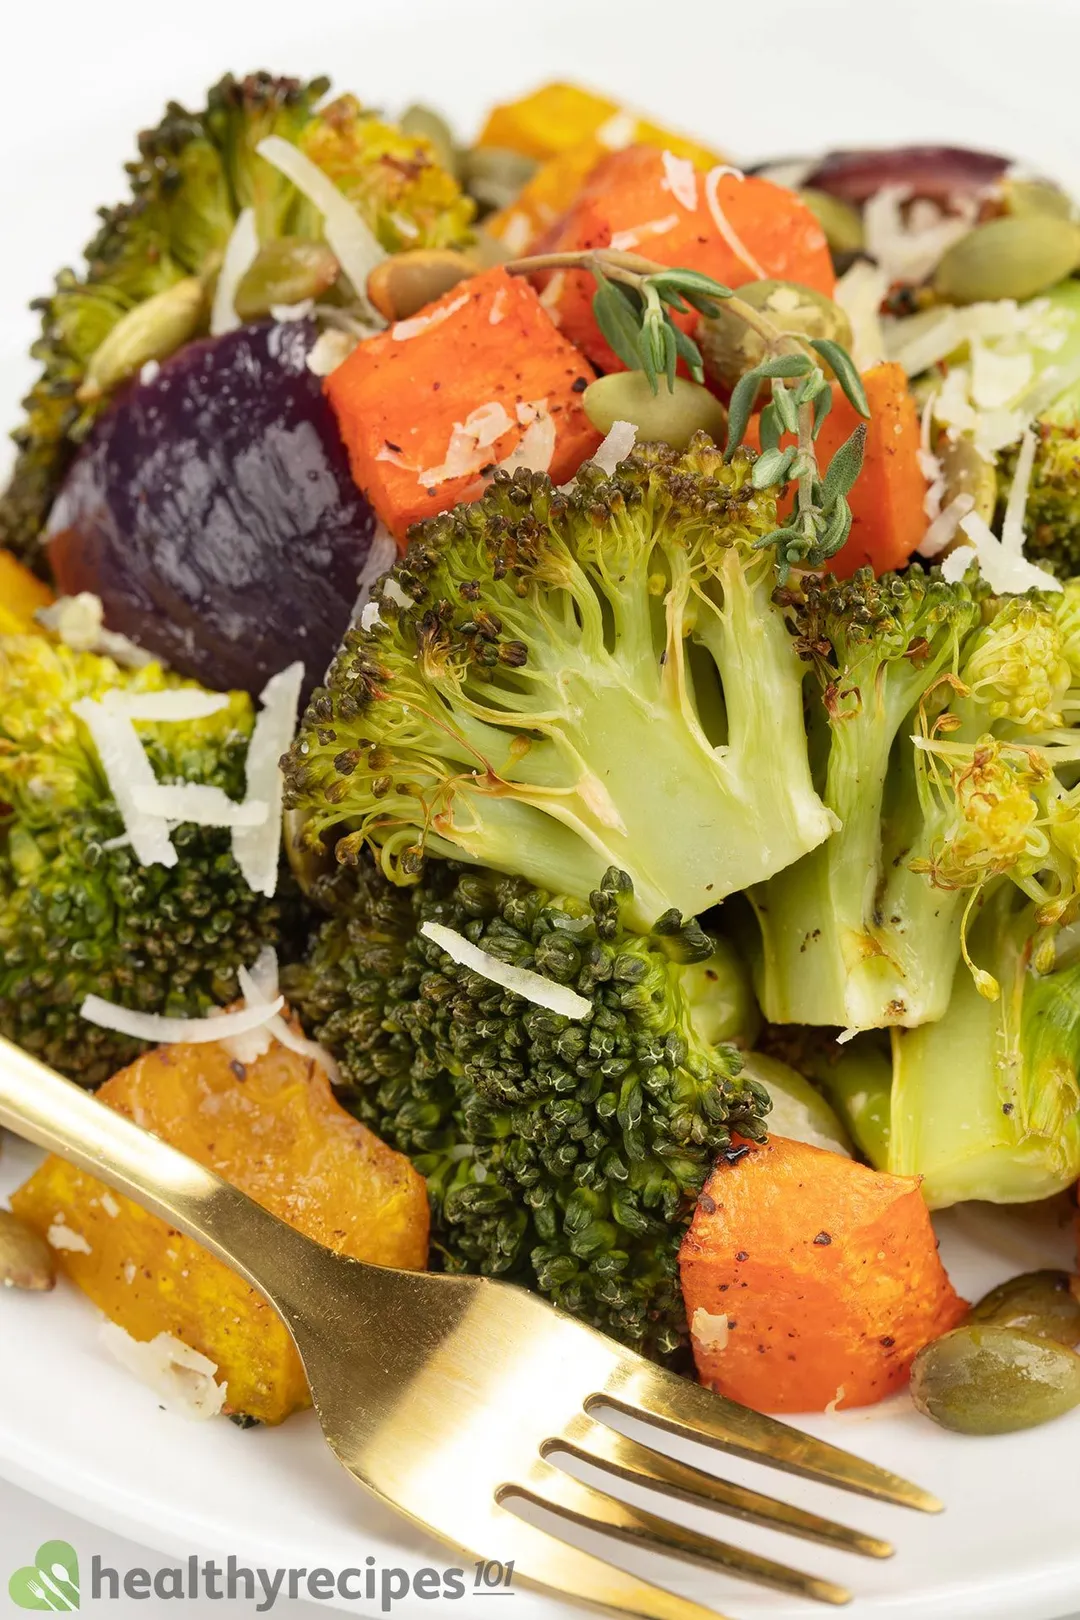 A close-up shot of broccoli florets, squash cubes, shredded cheese, and a fork.